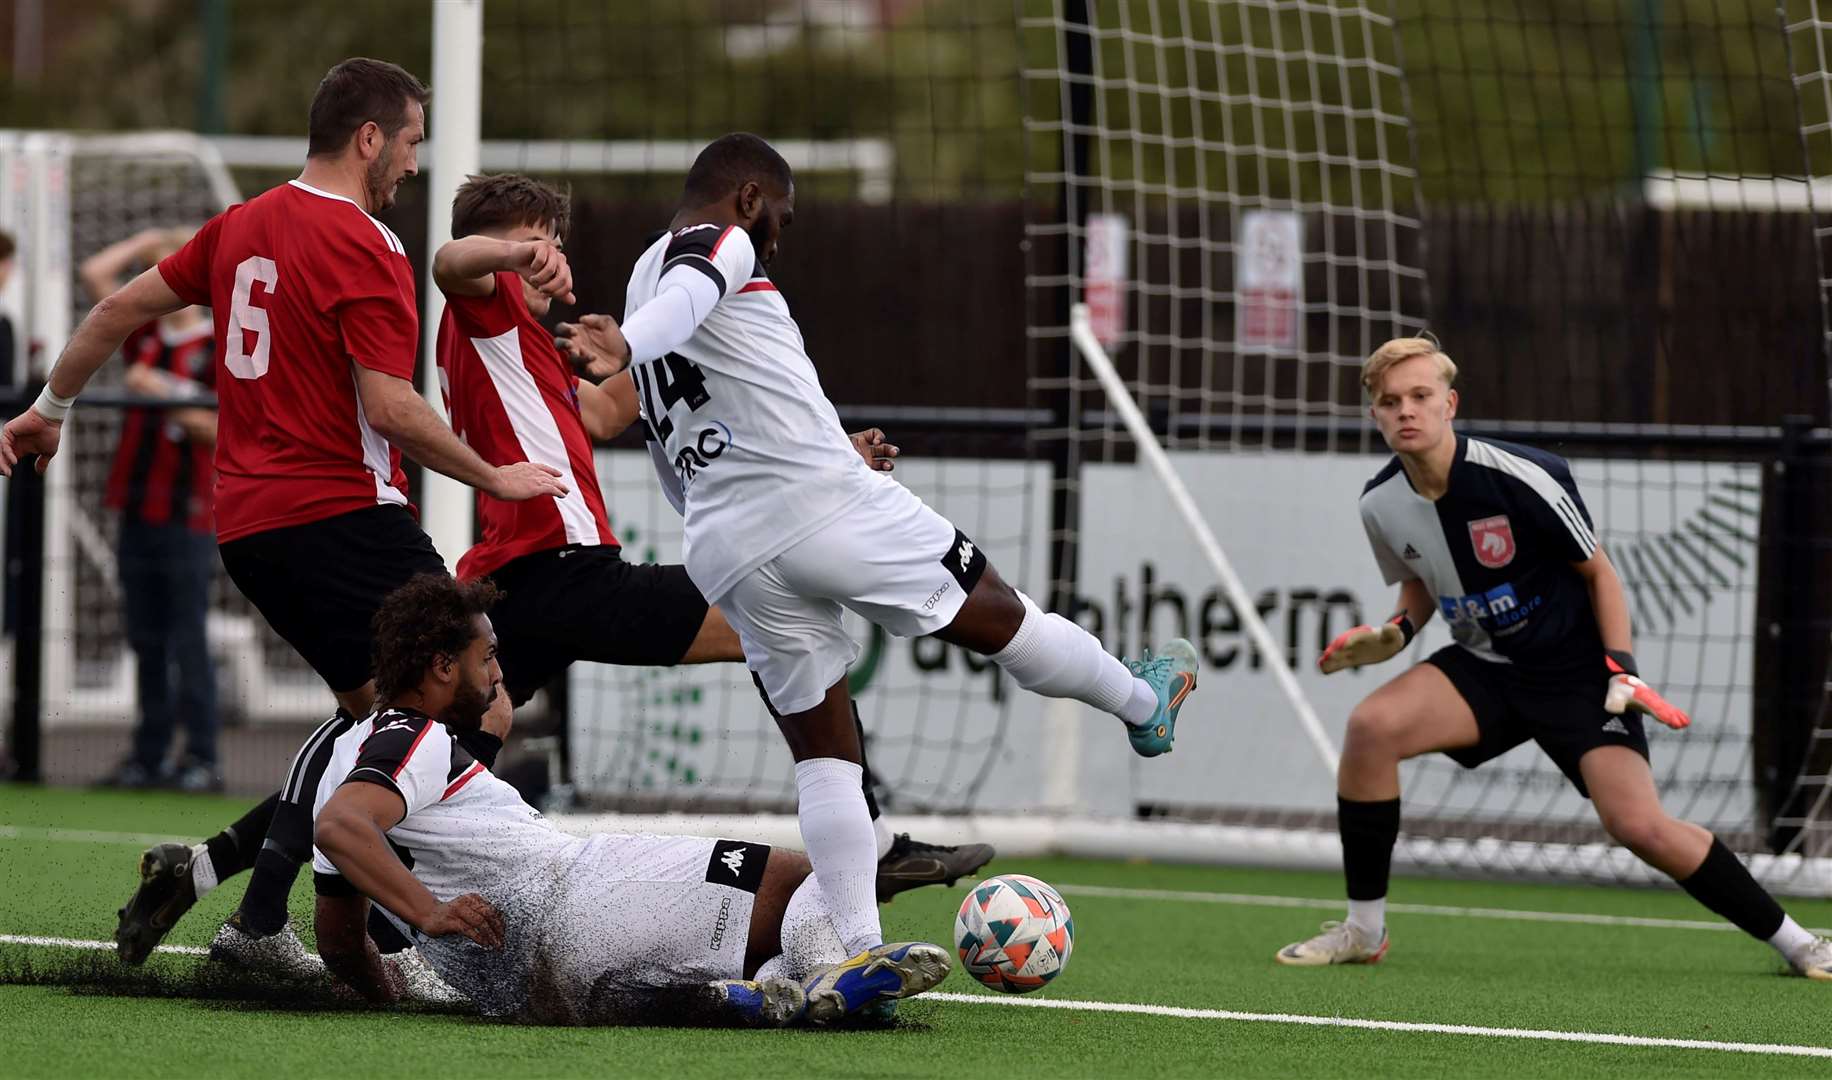 Warren Mfula turns the ball home to put Faversham ahead against Kent United. Picture: Ian Scammell